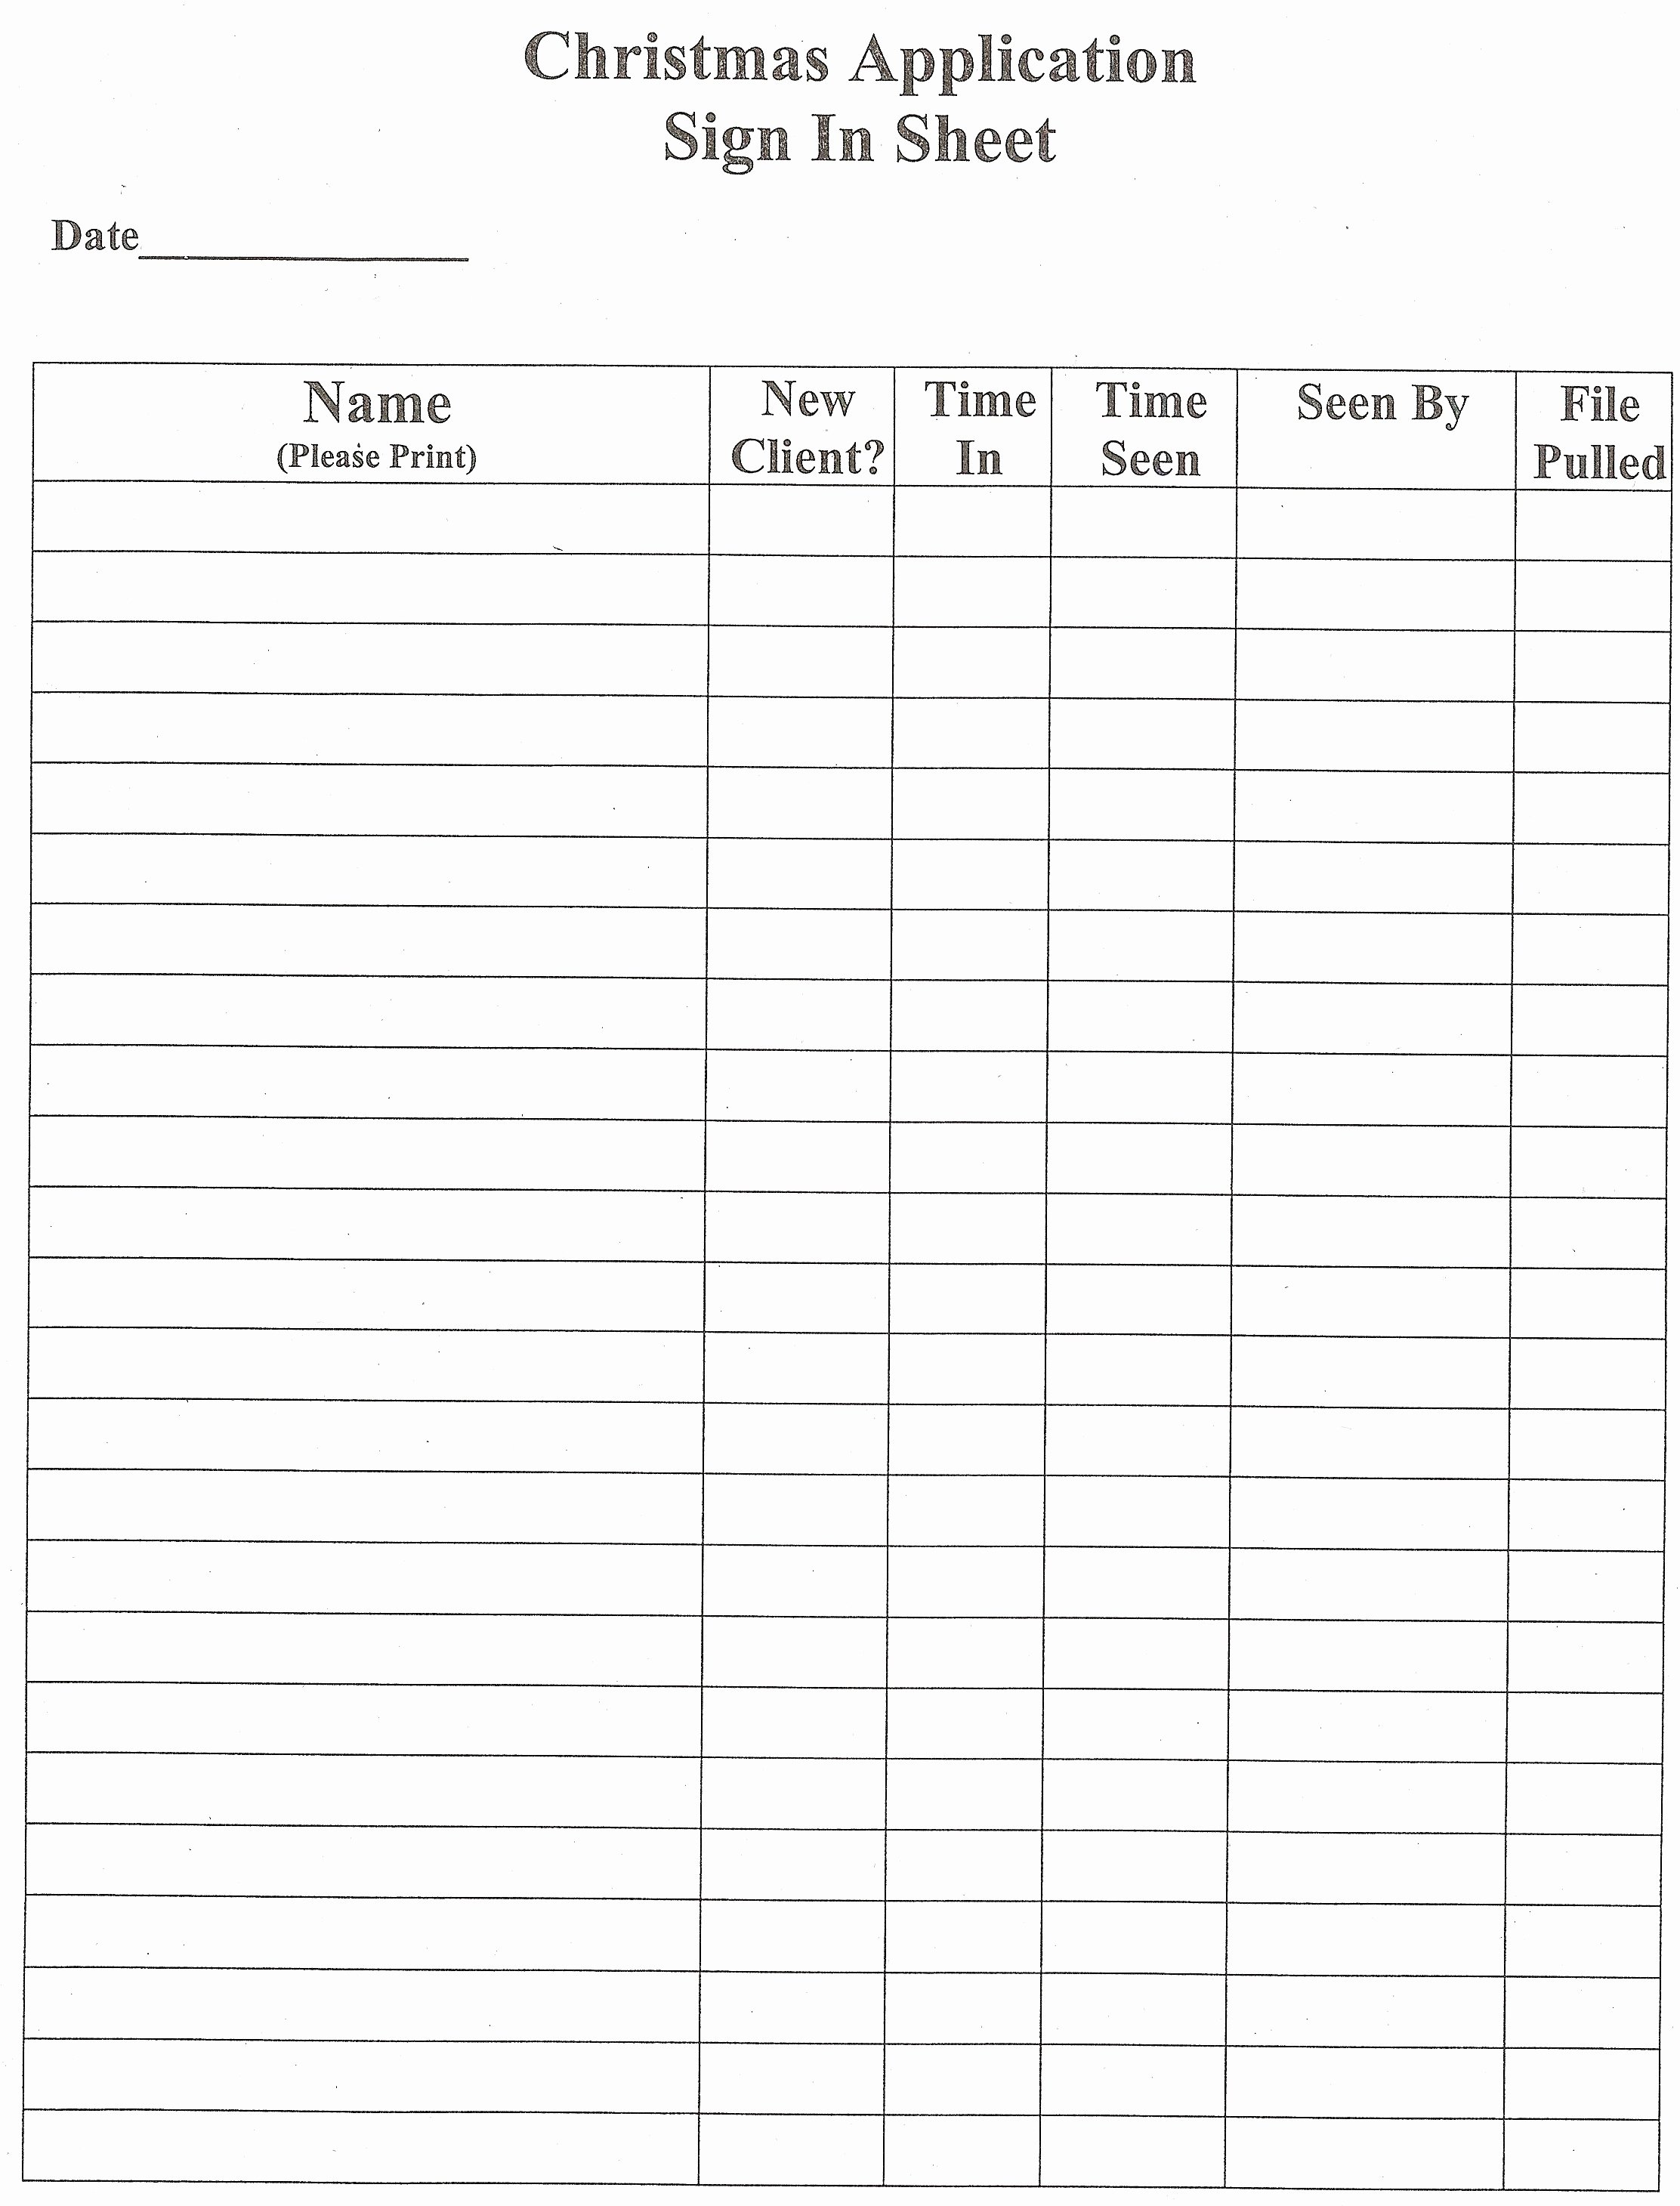 Time Sign Up Sheet Template Inspirational Time Sign Up Sheet Template Portablegasgrillweber